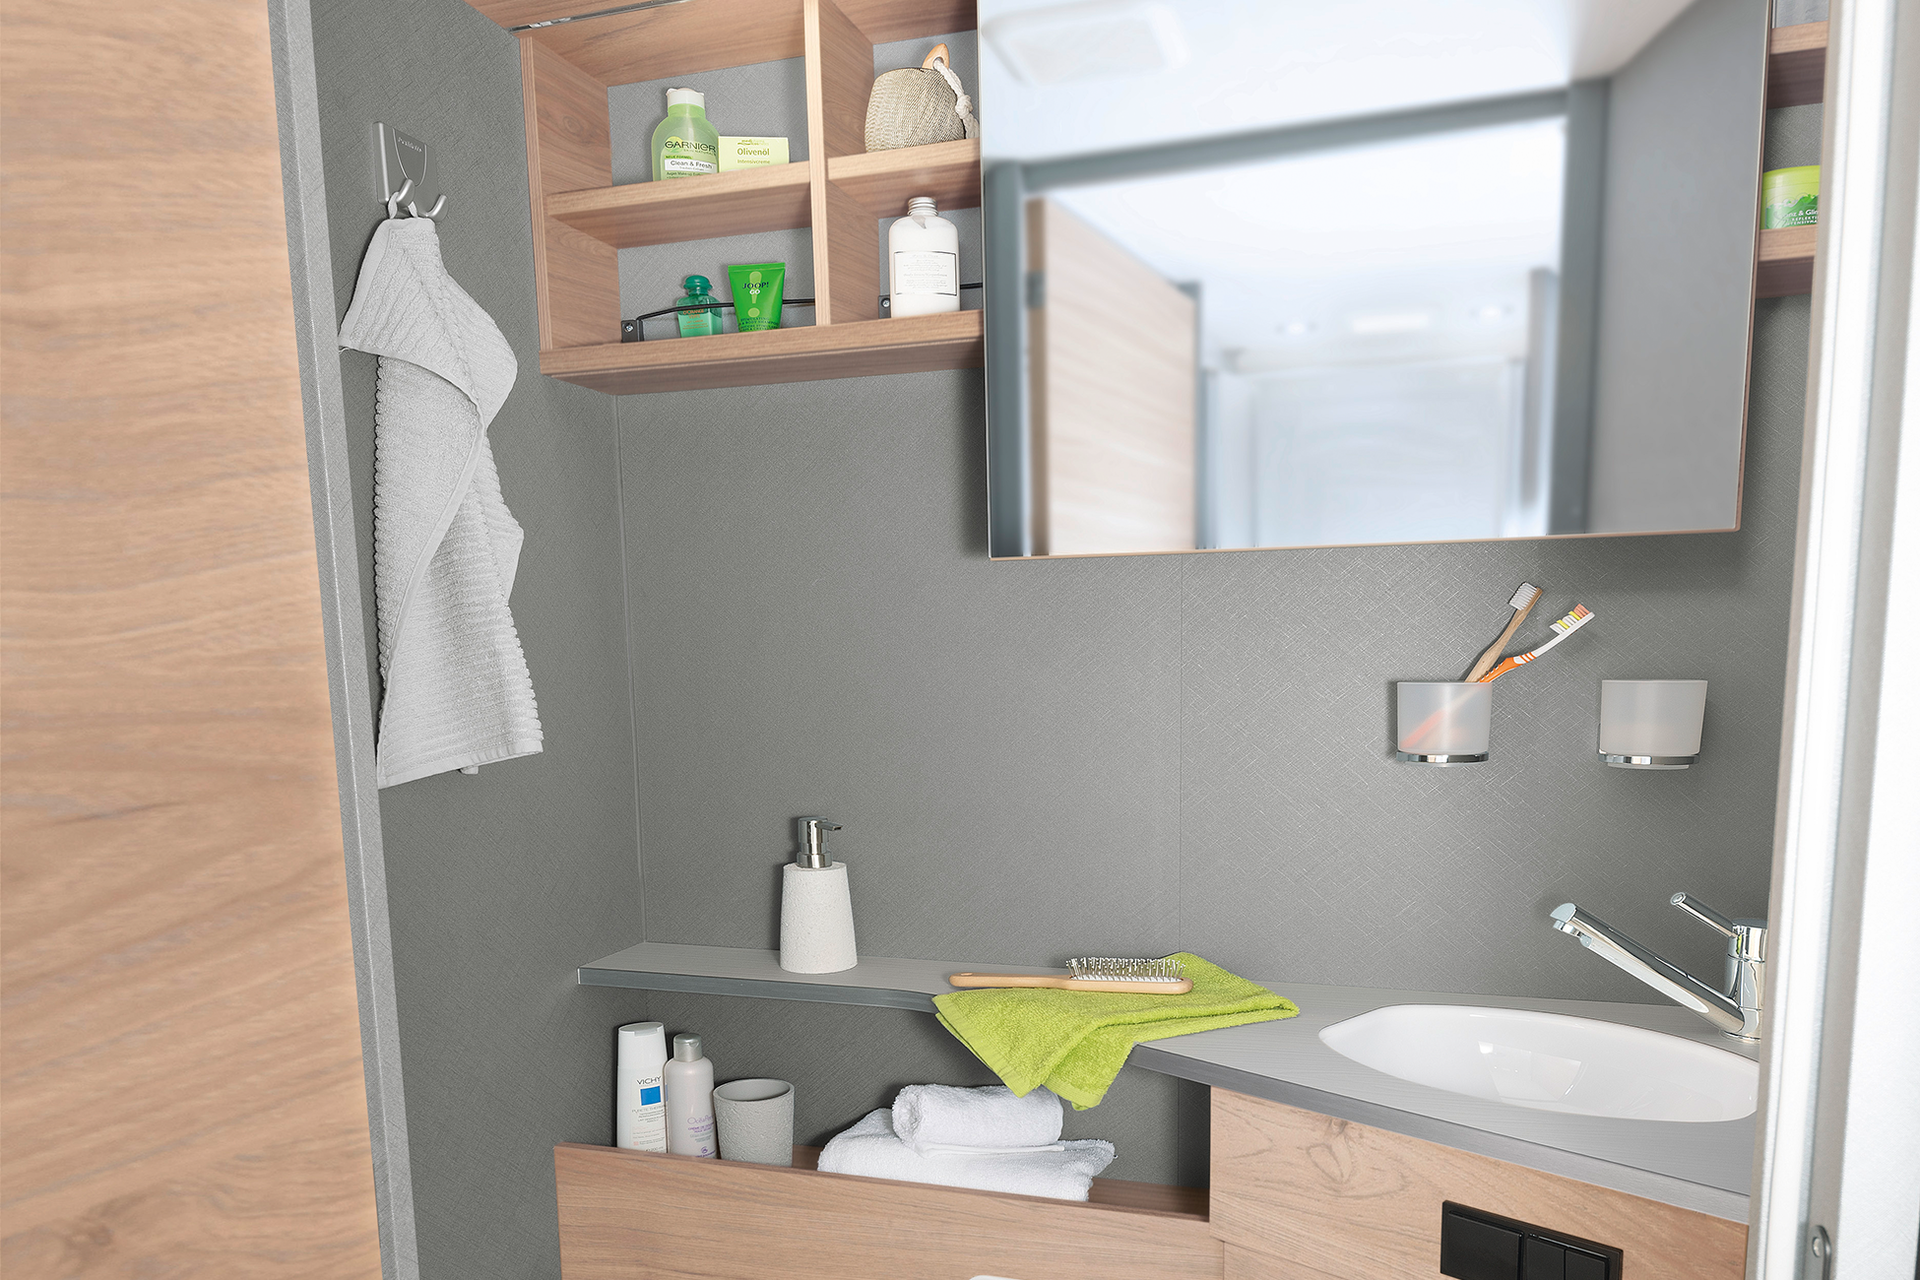 Bright and modern washroom with practical mirror that can be moved sideways, as well as numerous shelves and storage options • T 7052 DBL